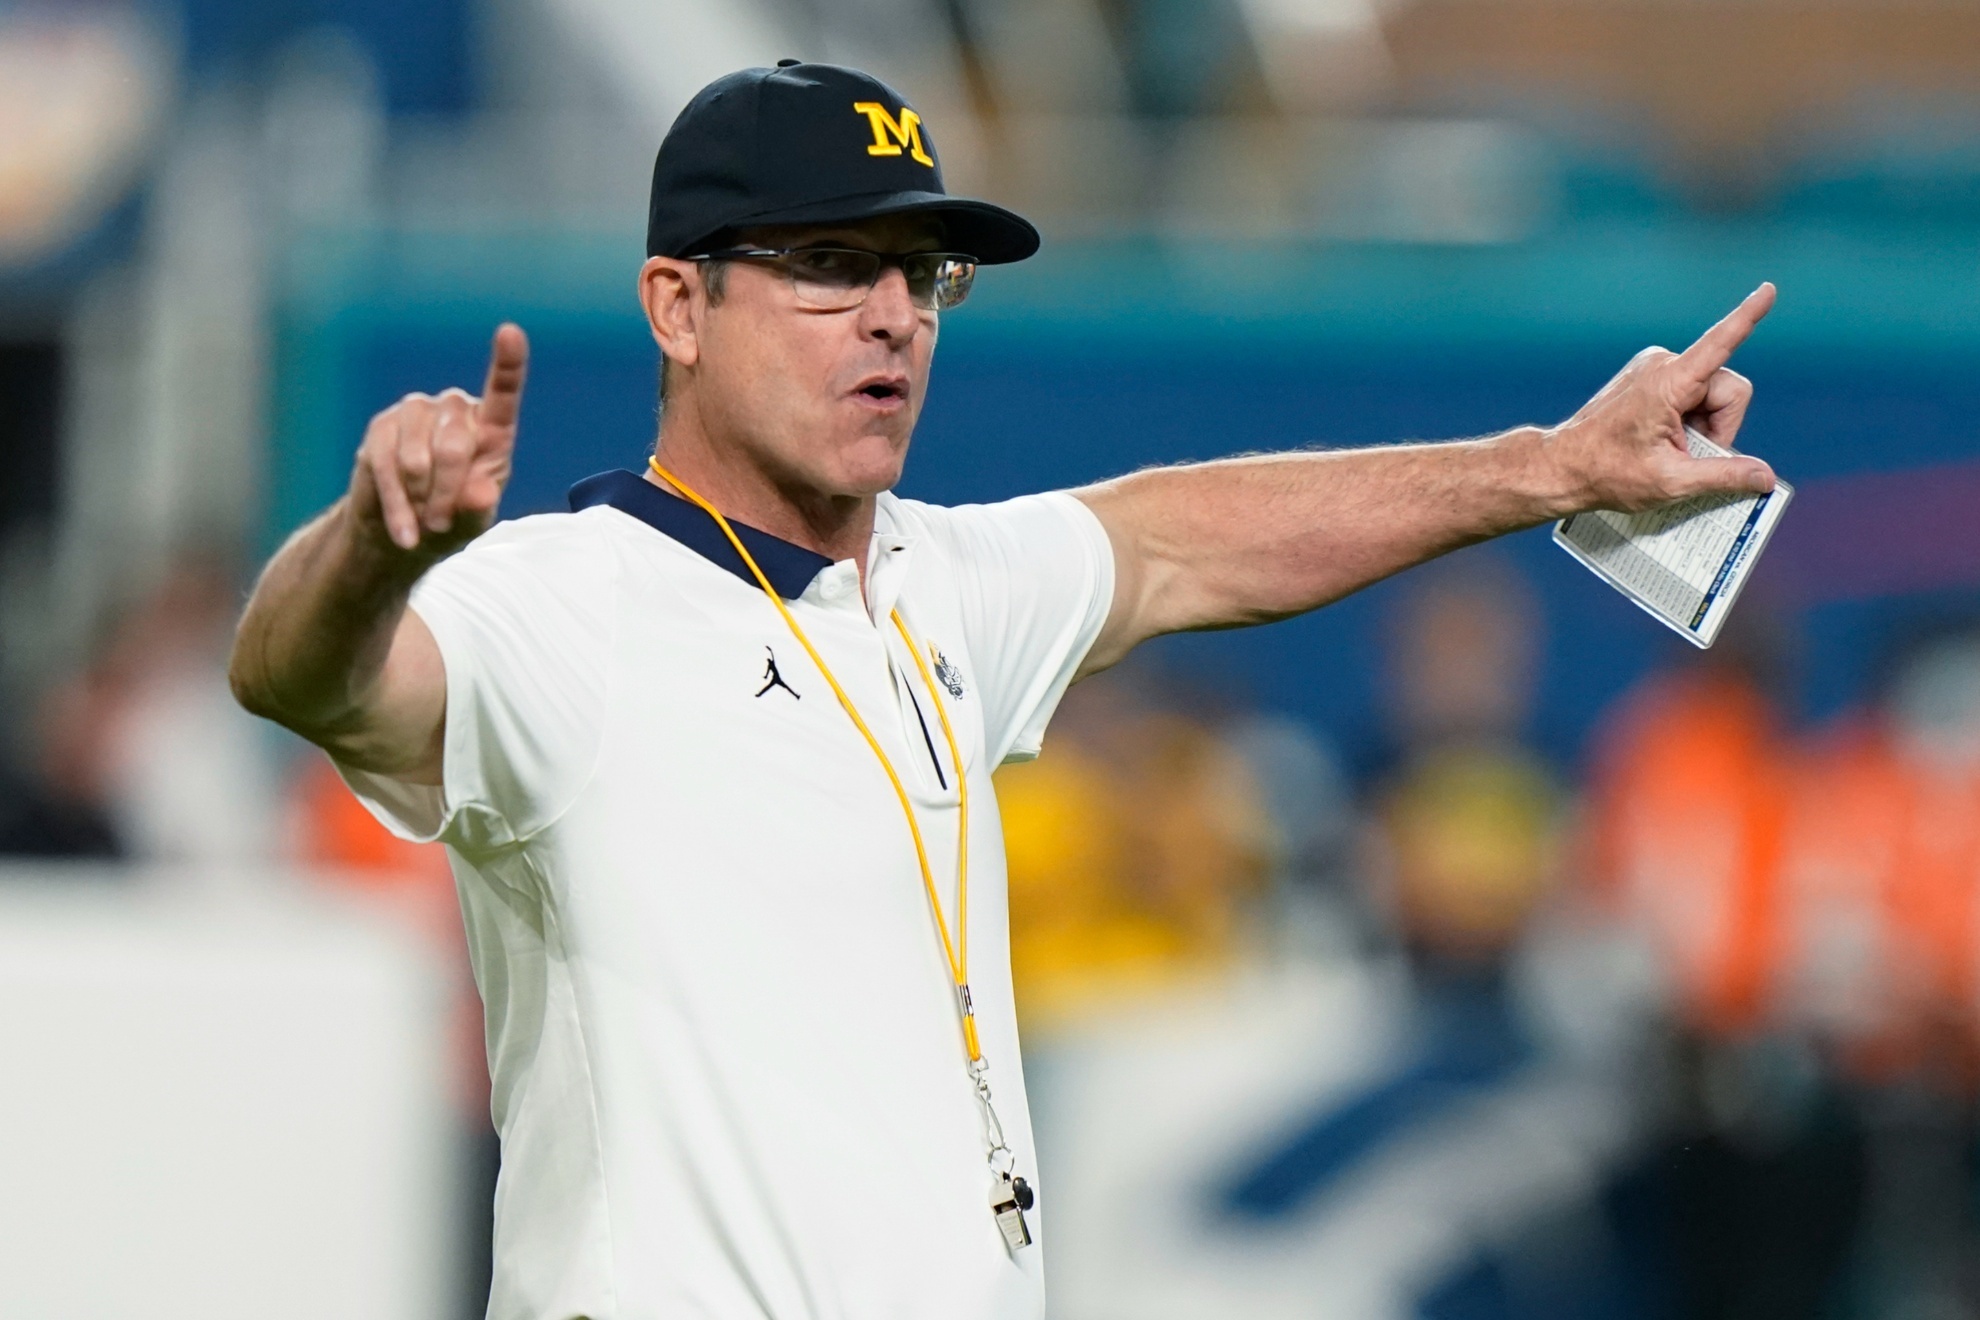 Jim Harbaugh recently won the National Title with Michigan.